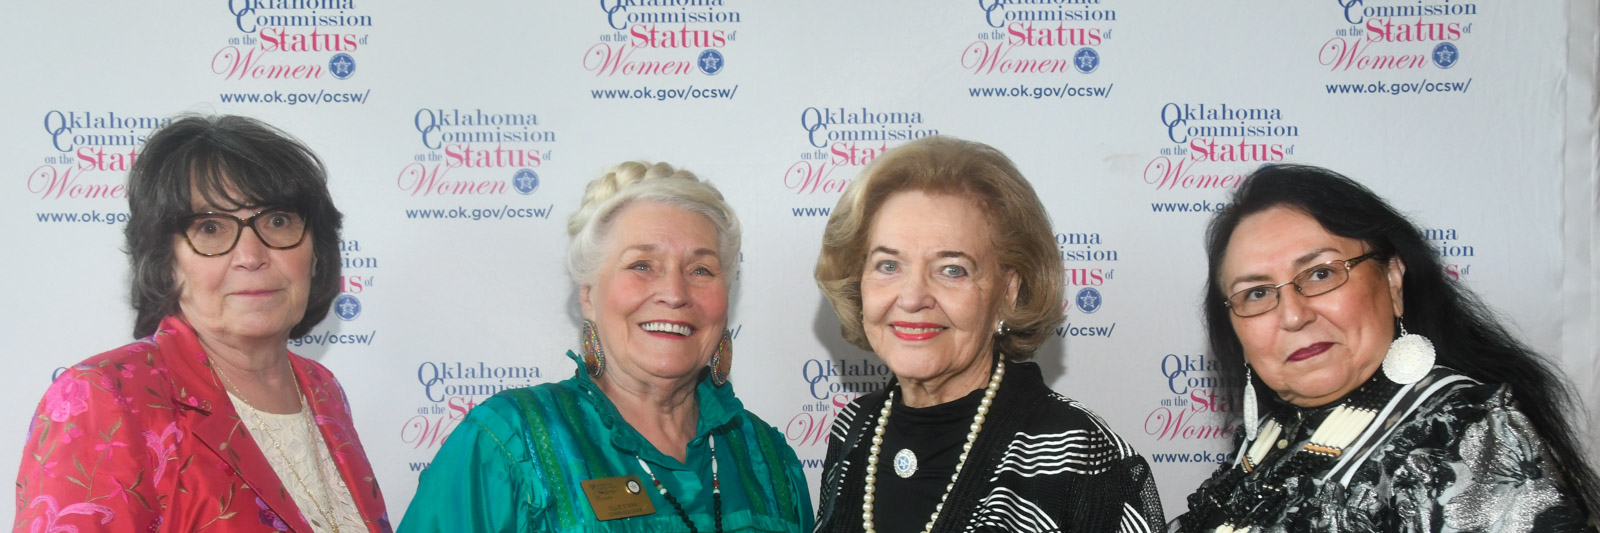 A group picture with Carleen Burger at one of the Oklahoma Commission for Status of Women events